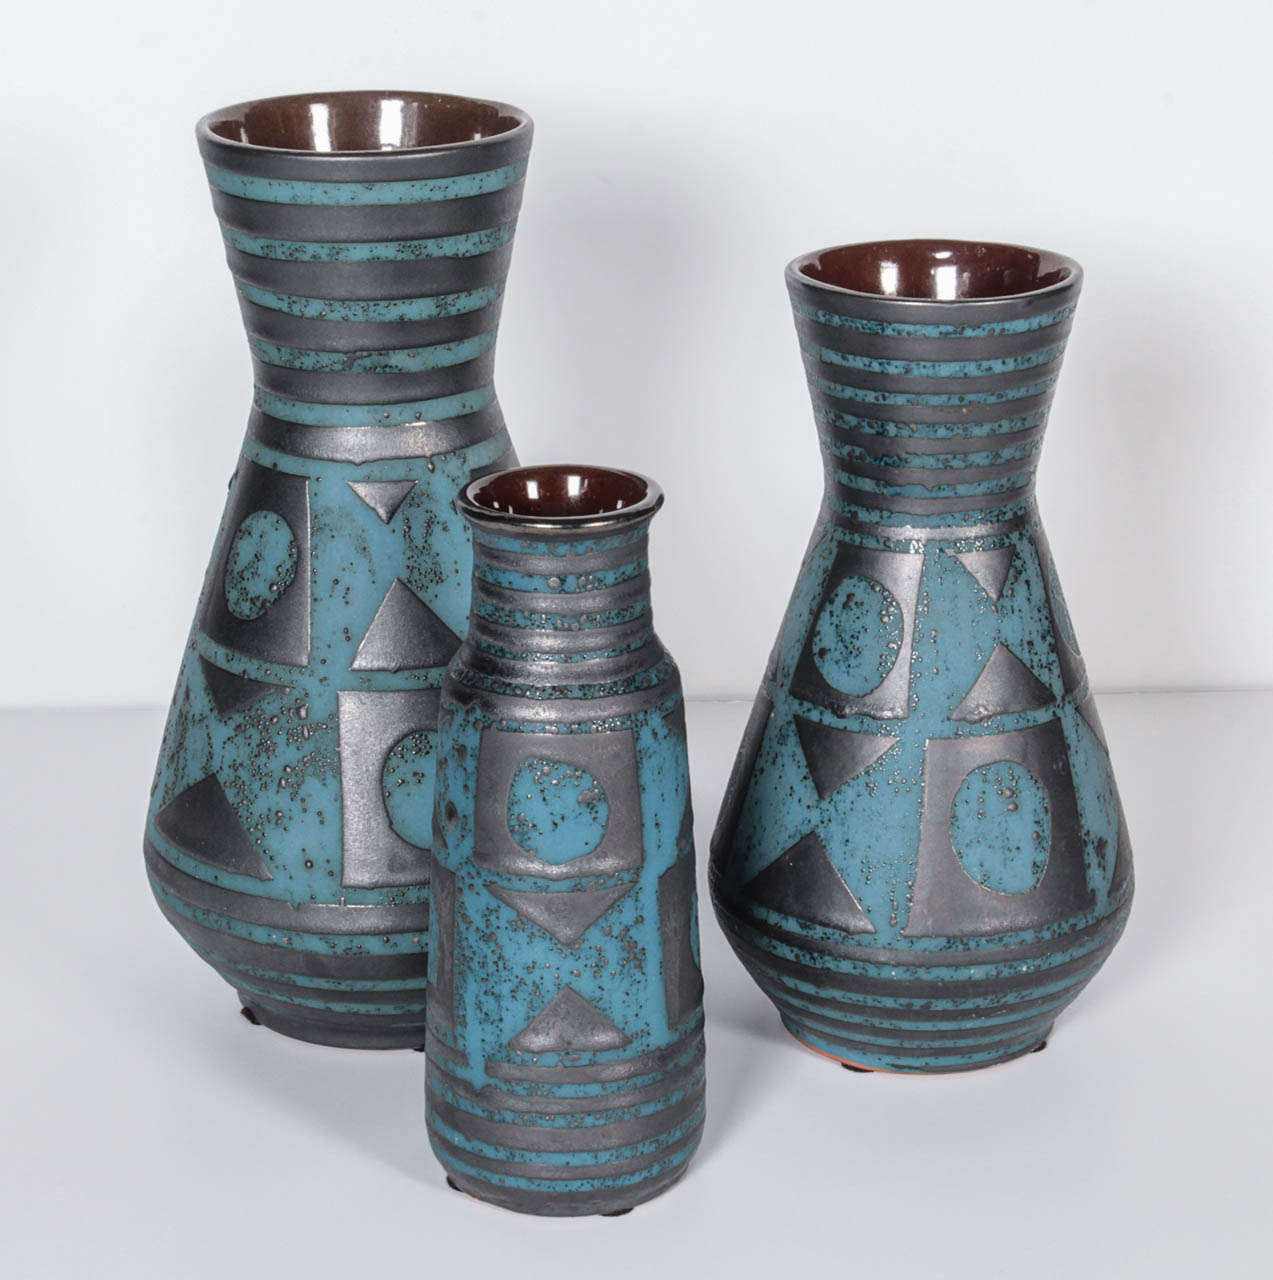 Trio of 3 German ceramic vases. Blue glaze with black metallic finish. Marked. Can be purchased individually.
Left: 6.25